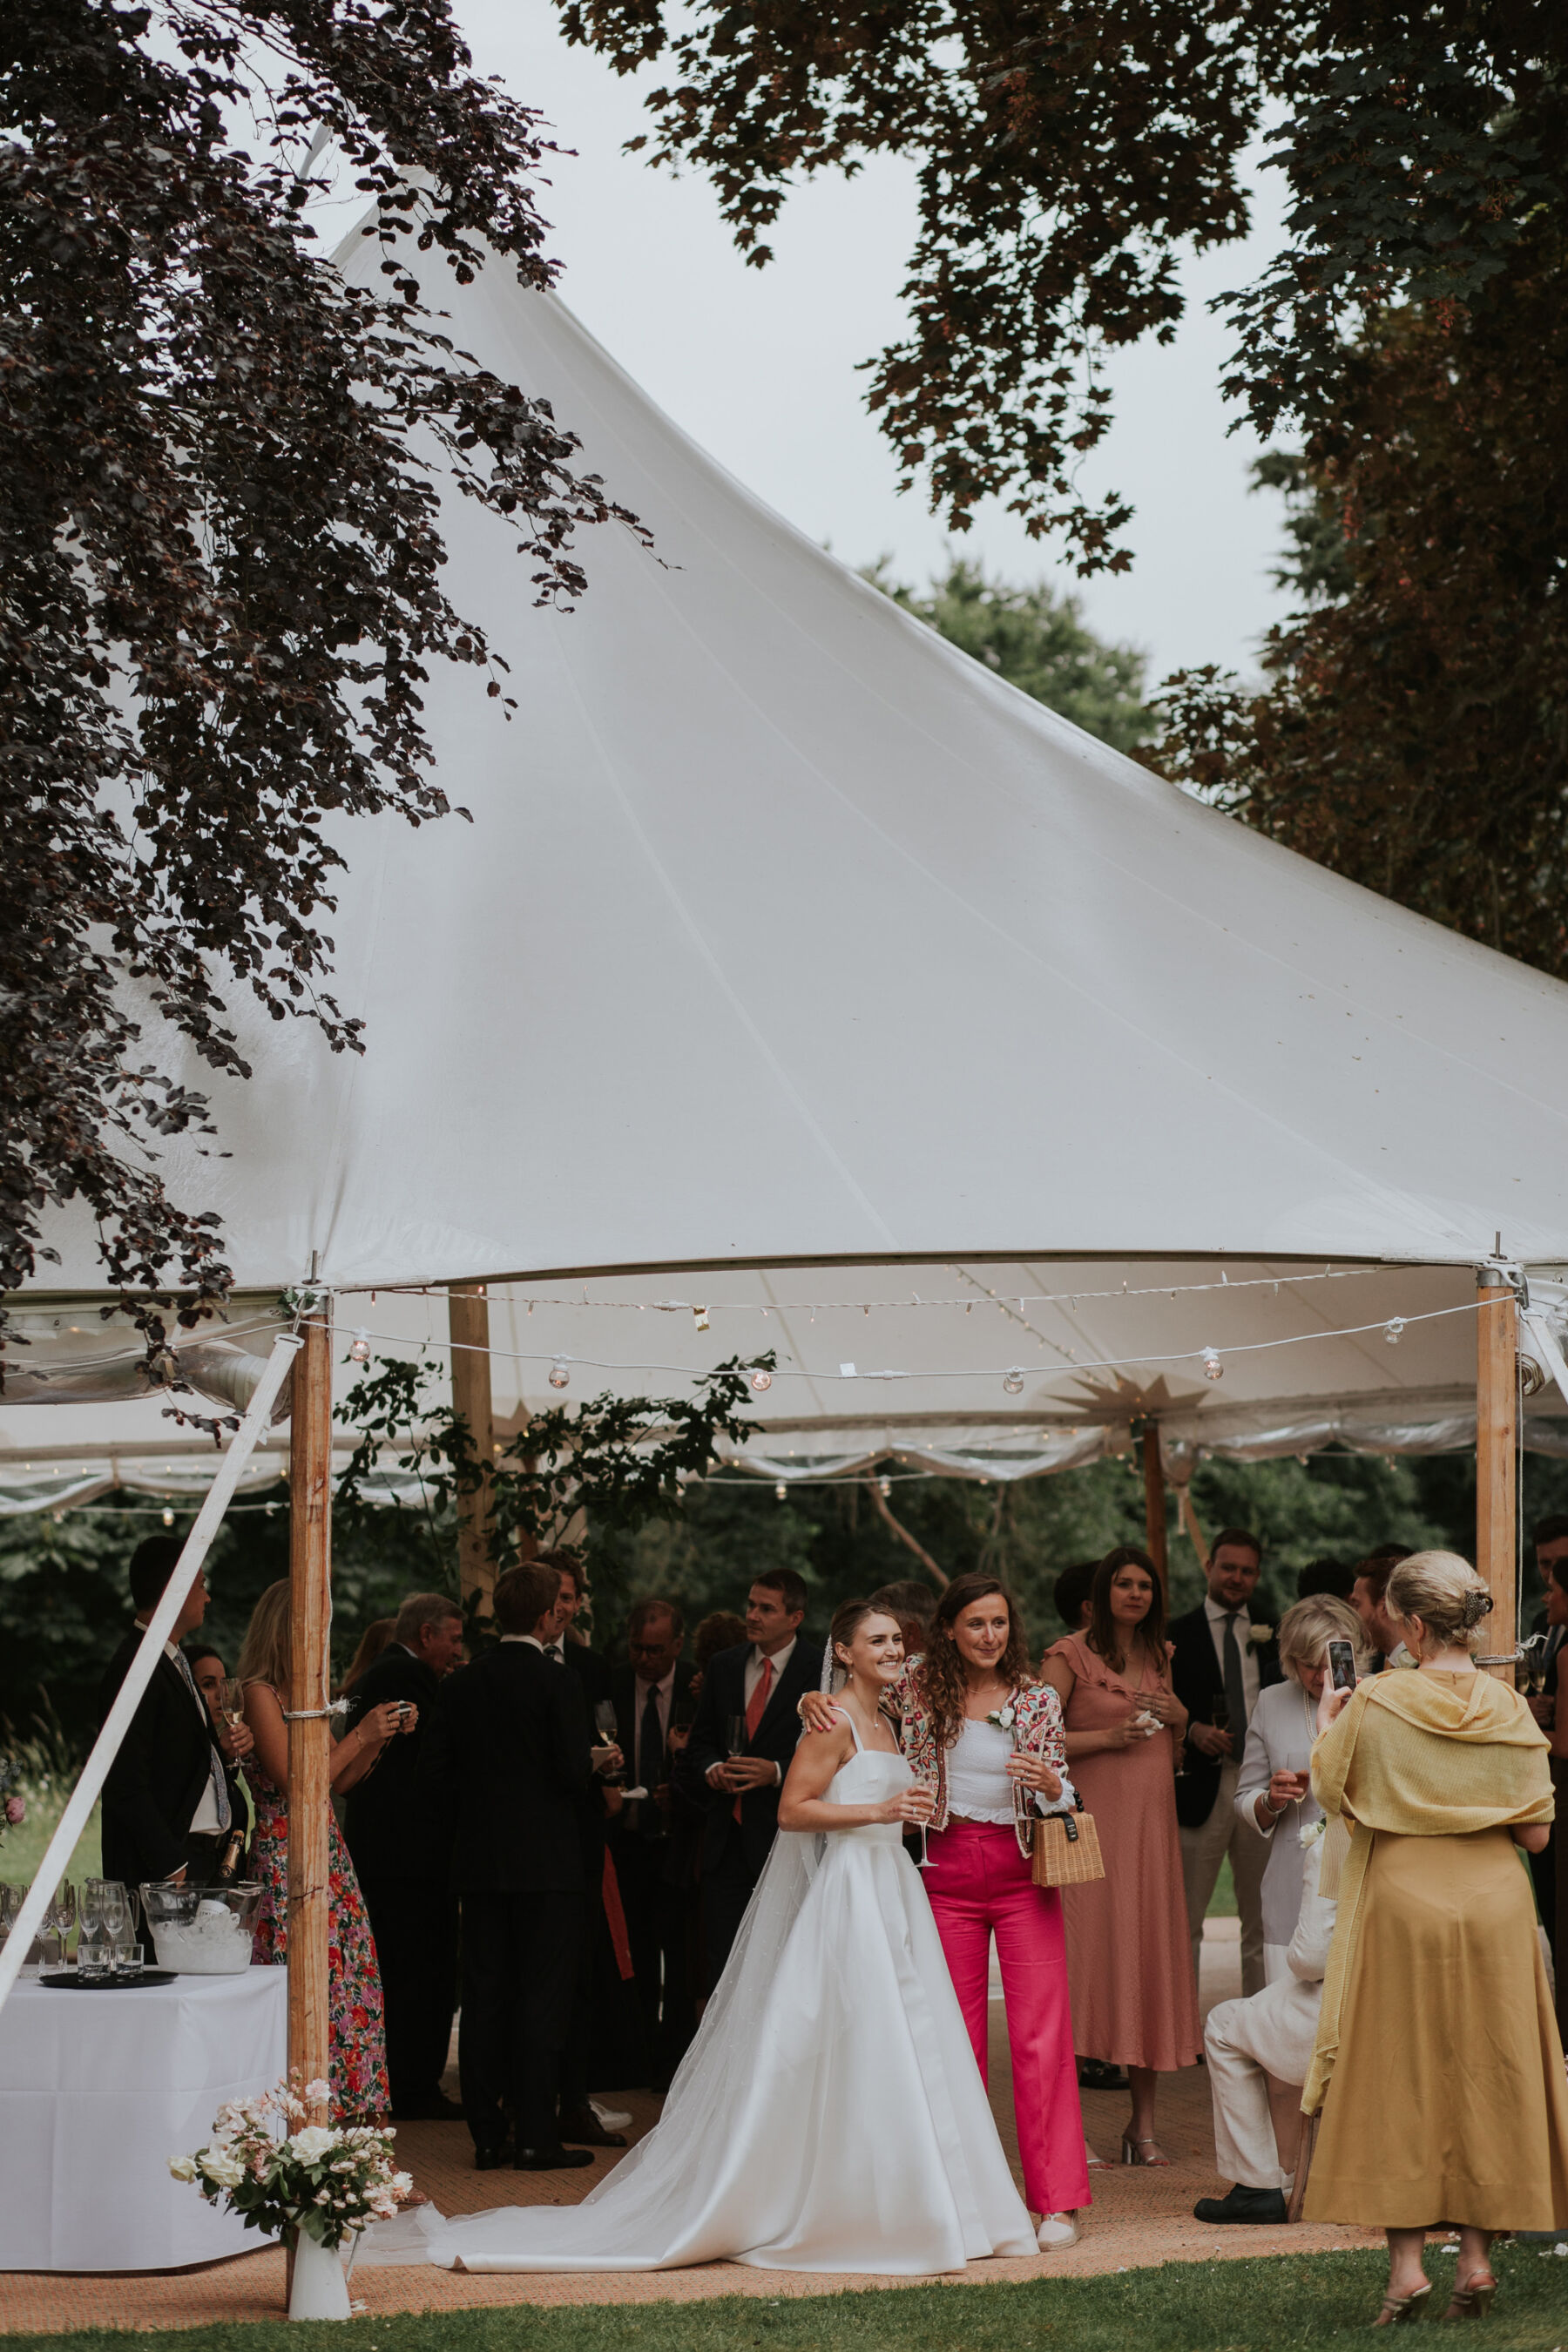 Bride with a wedding guest inside a marquee.